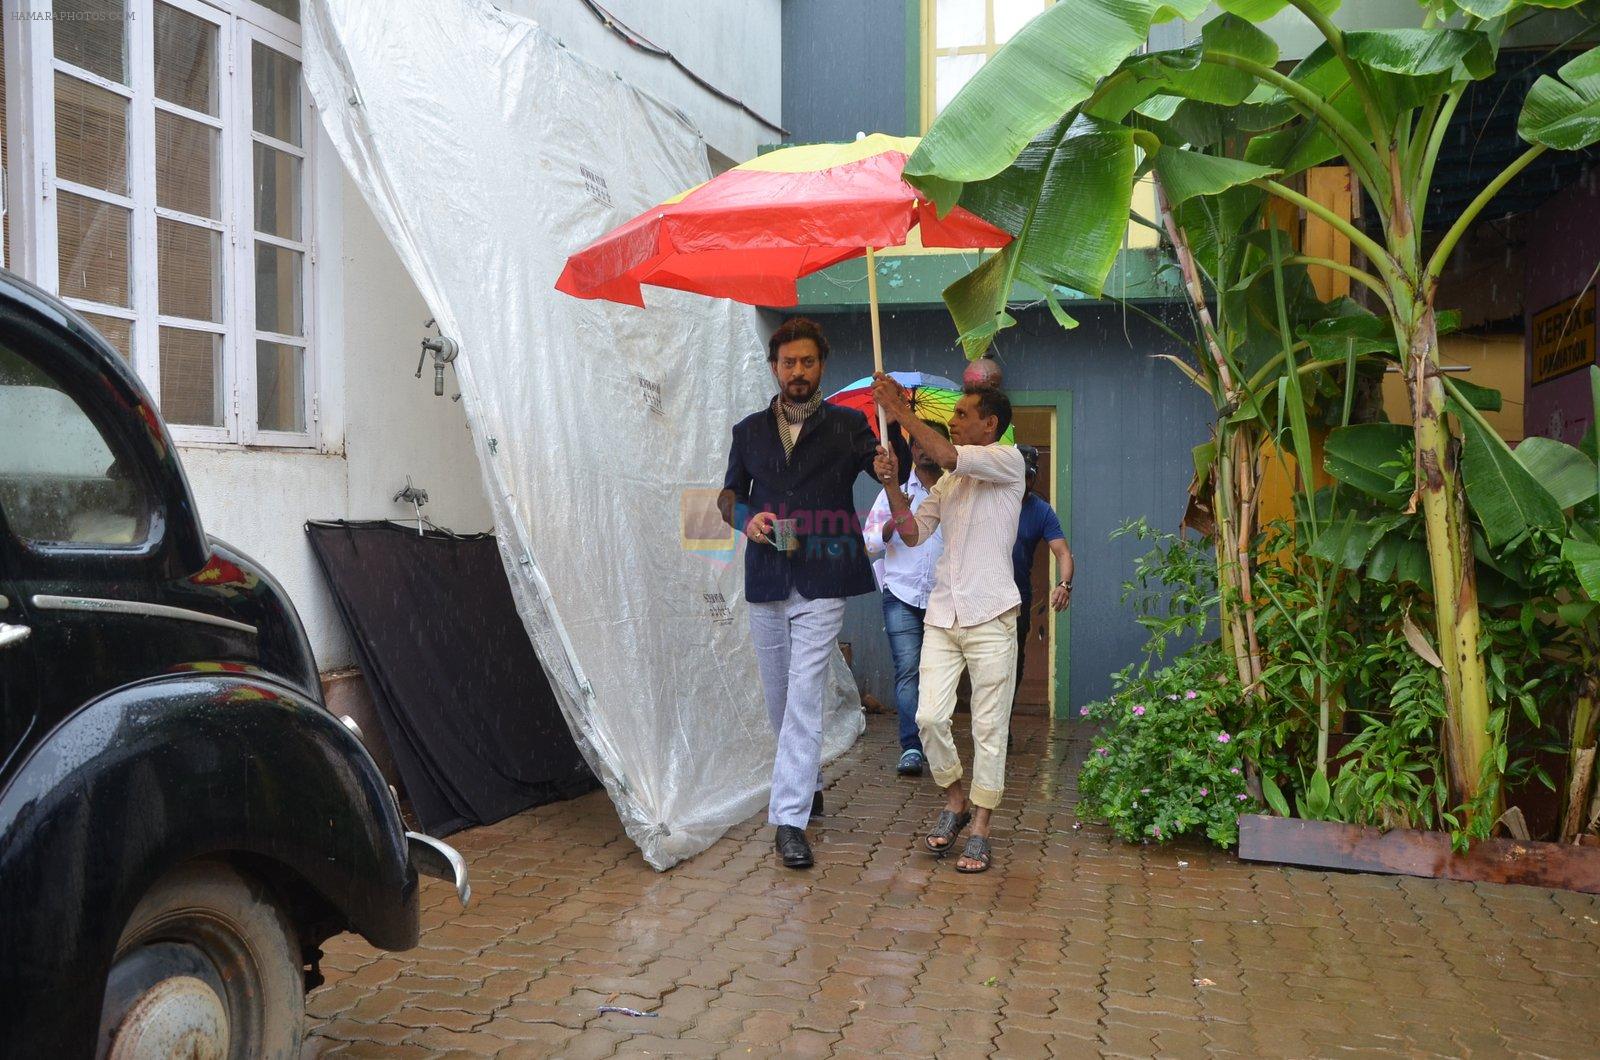 Irrfan Khan on the sets of the television serial Chidiya Ghar on June 24, 2016